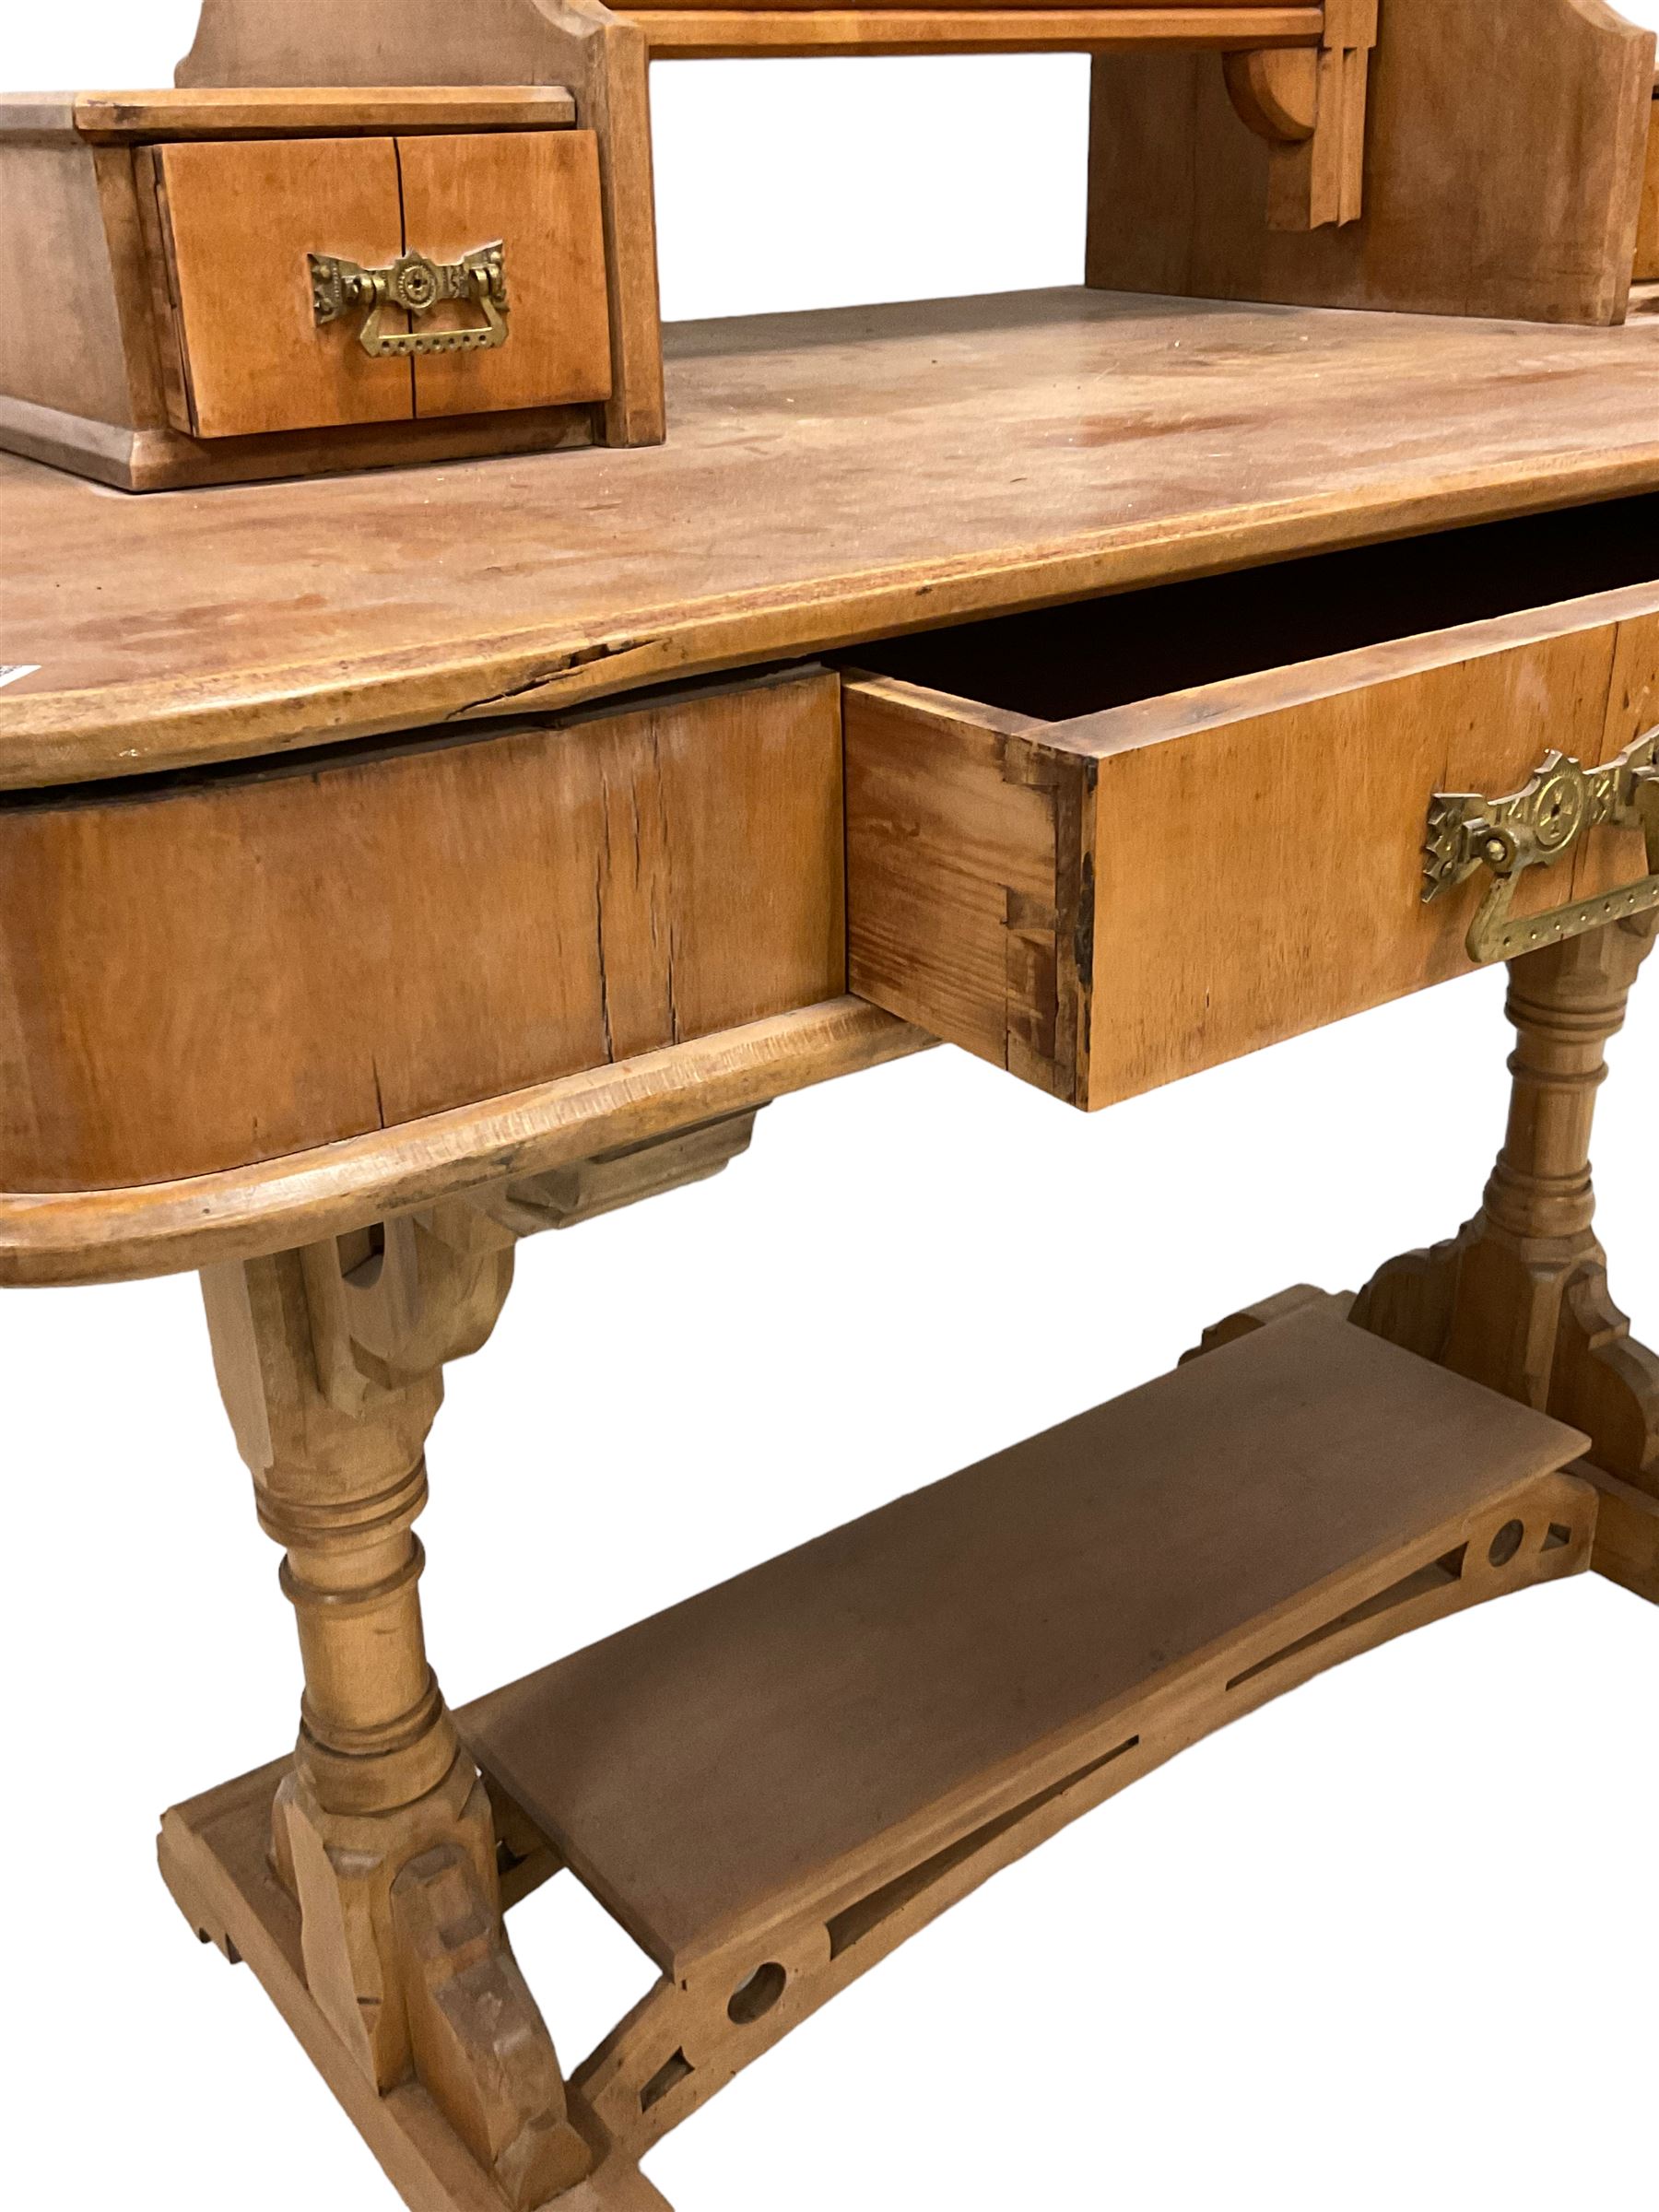 Late Victorian Aesthetic Movement satinwood dressing table - Image 4 of 7